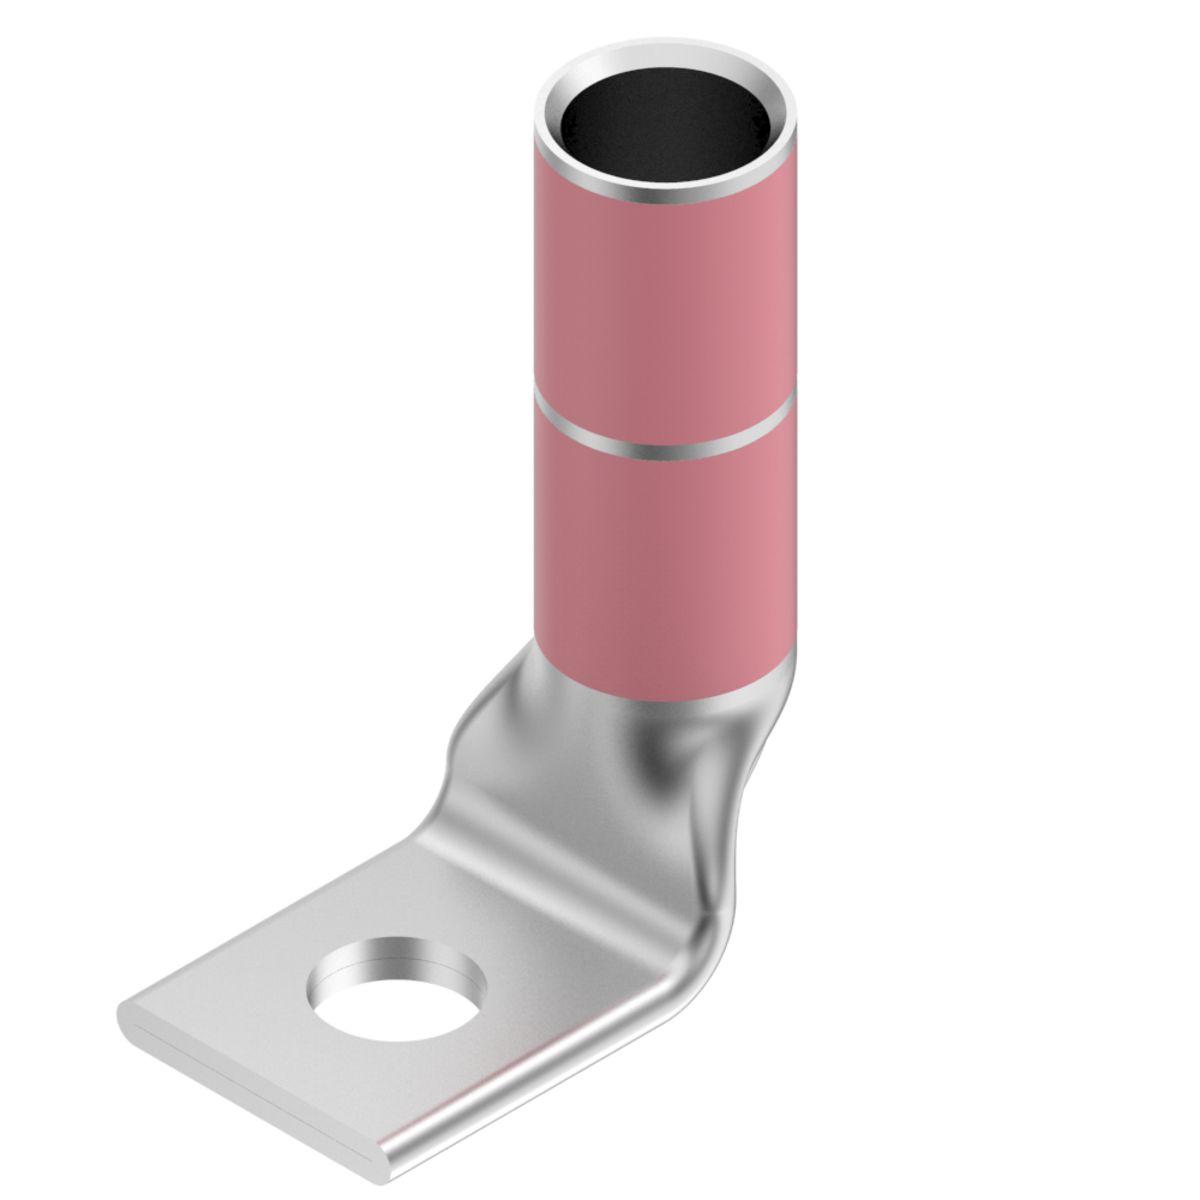 Hubbell YA3890 700 kcmil CU, One Hole, 5/8 Stud Size, Long Barrel, Internal Chamfer, Tin Plated, UL/CSA, 90°C, Up to 35kV,PINK Color Code, 400 Die Index. 